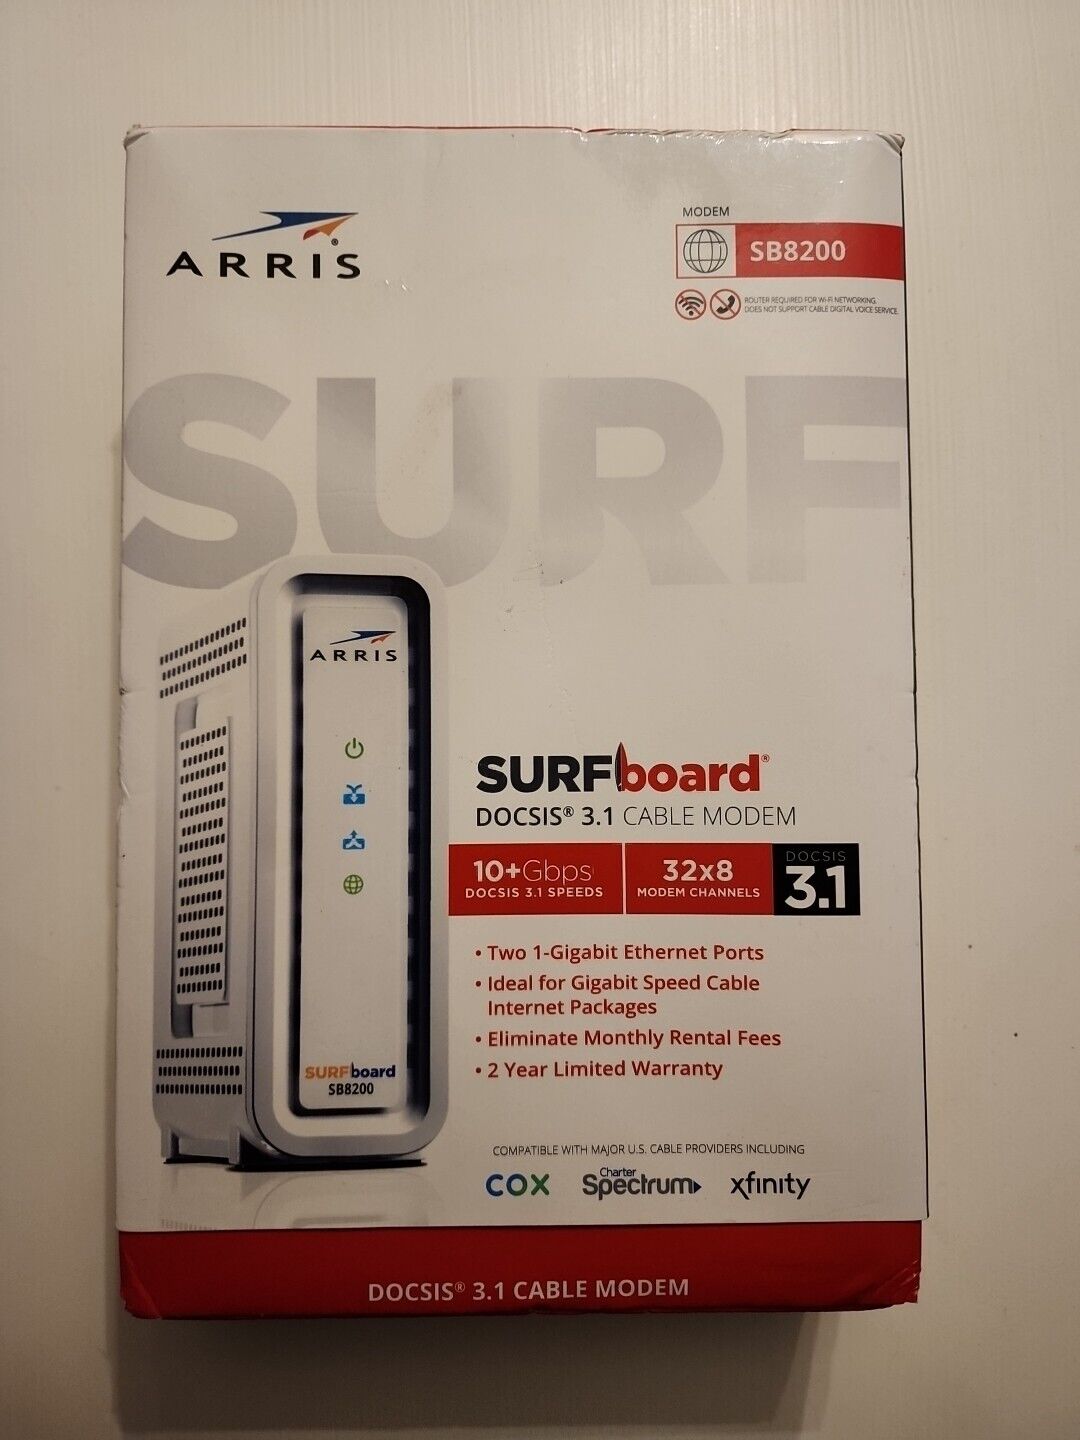 Brand NEW ARRIS SURFboard SB8200 DOCSIS 3.1 10 Gbps Cable Modem